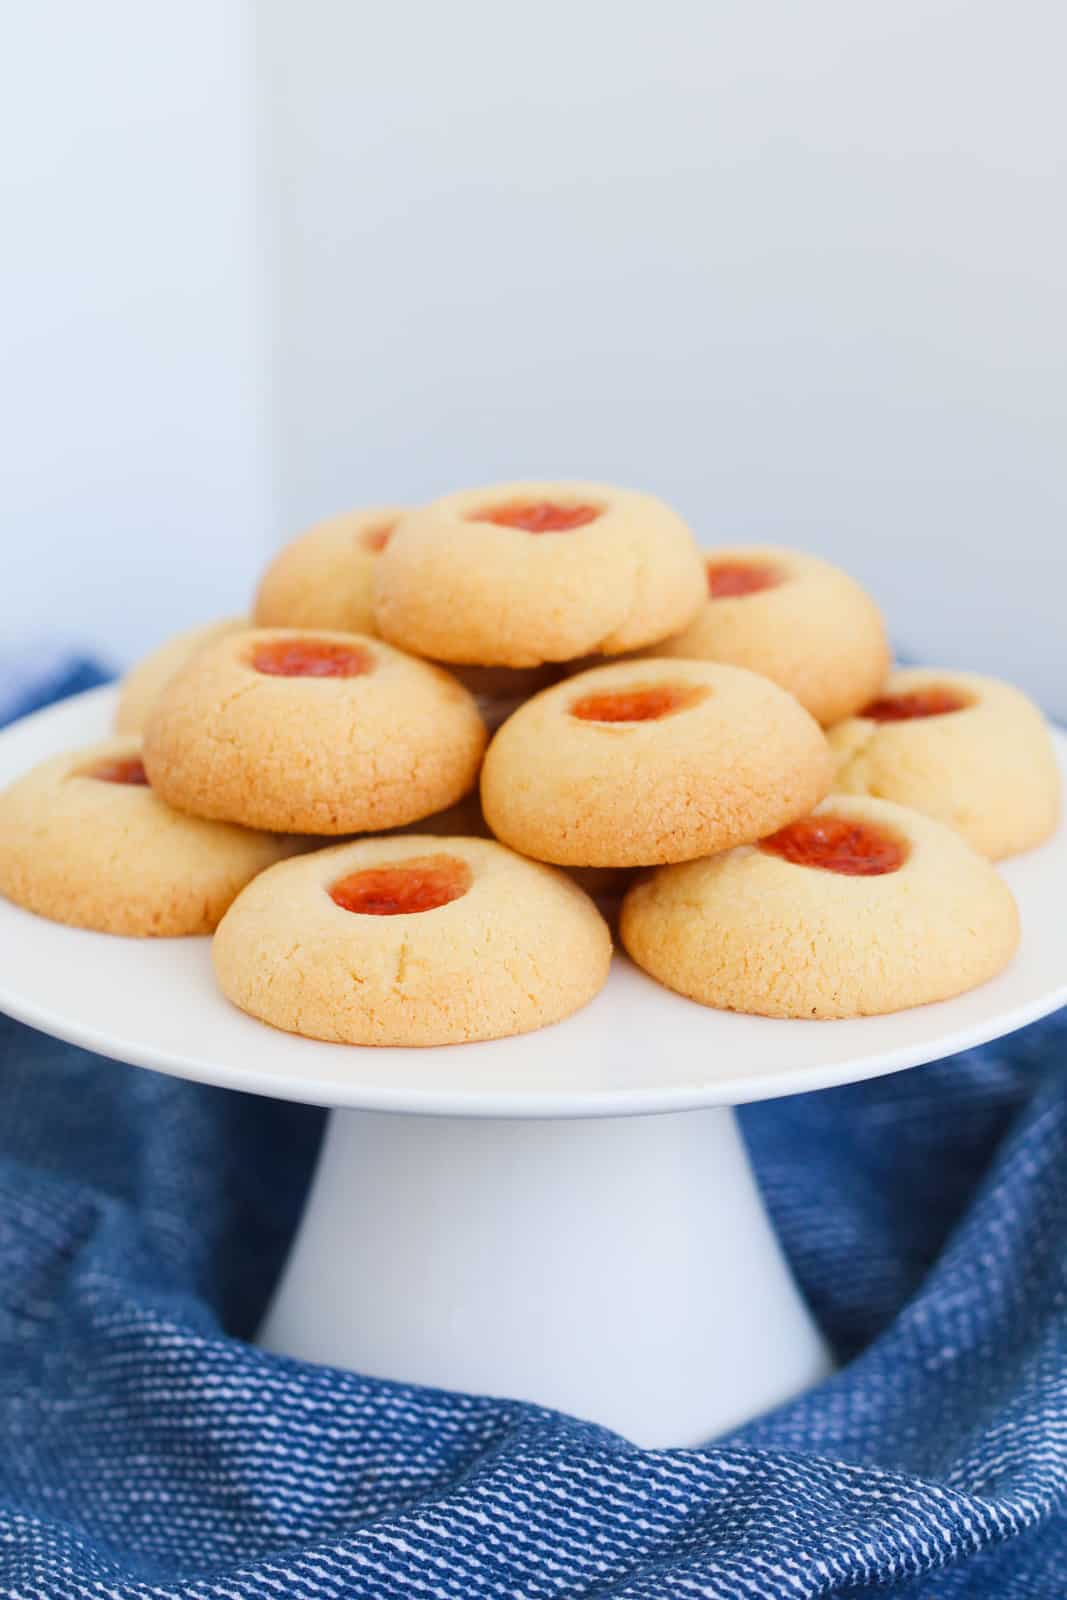 A plate of vanilla cookies with a filling of raspberry jam in the center.